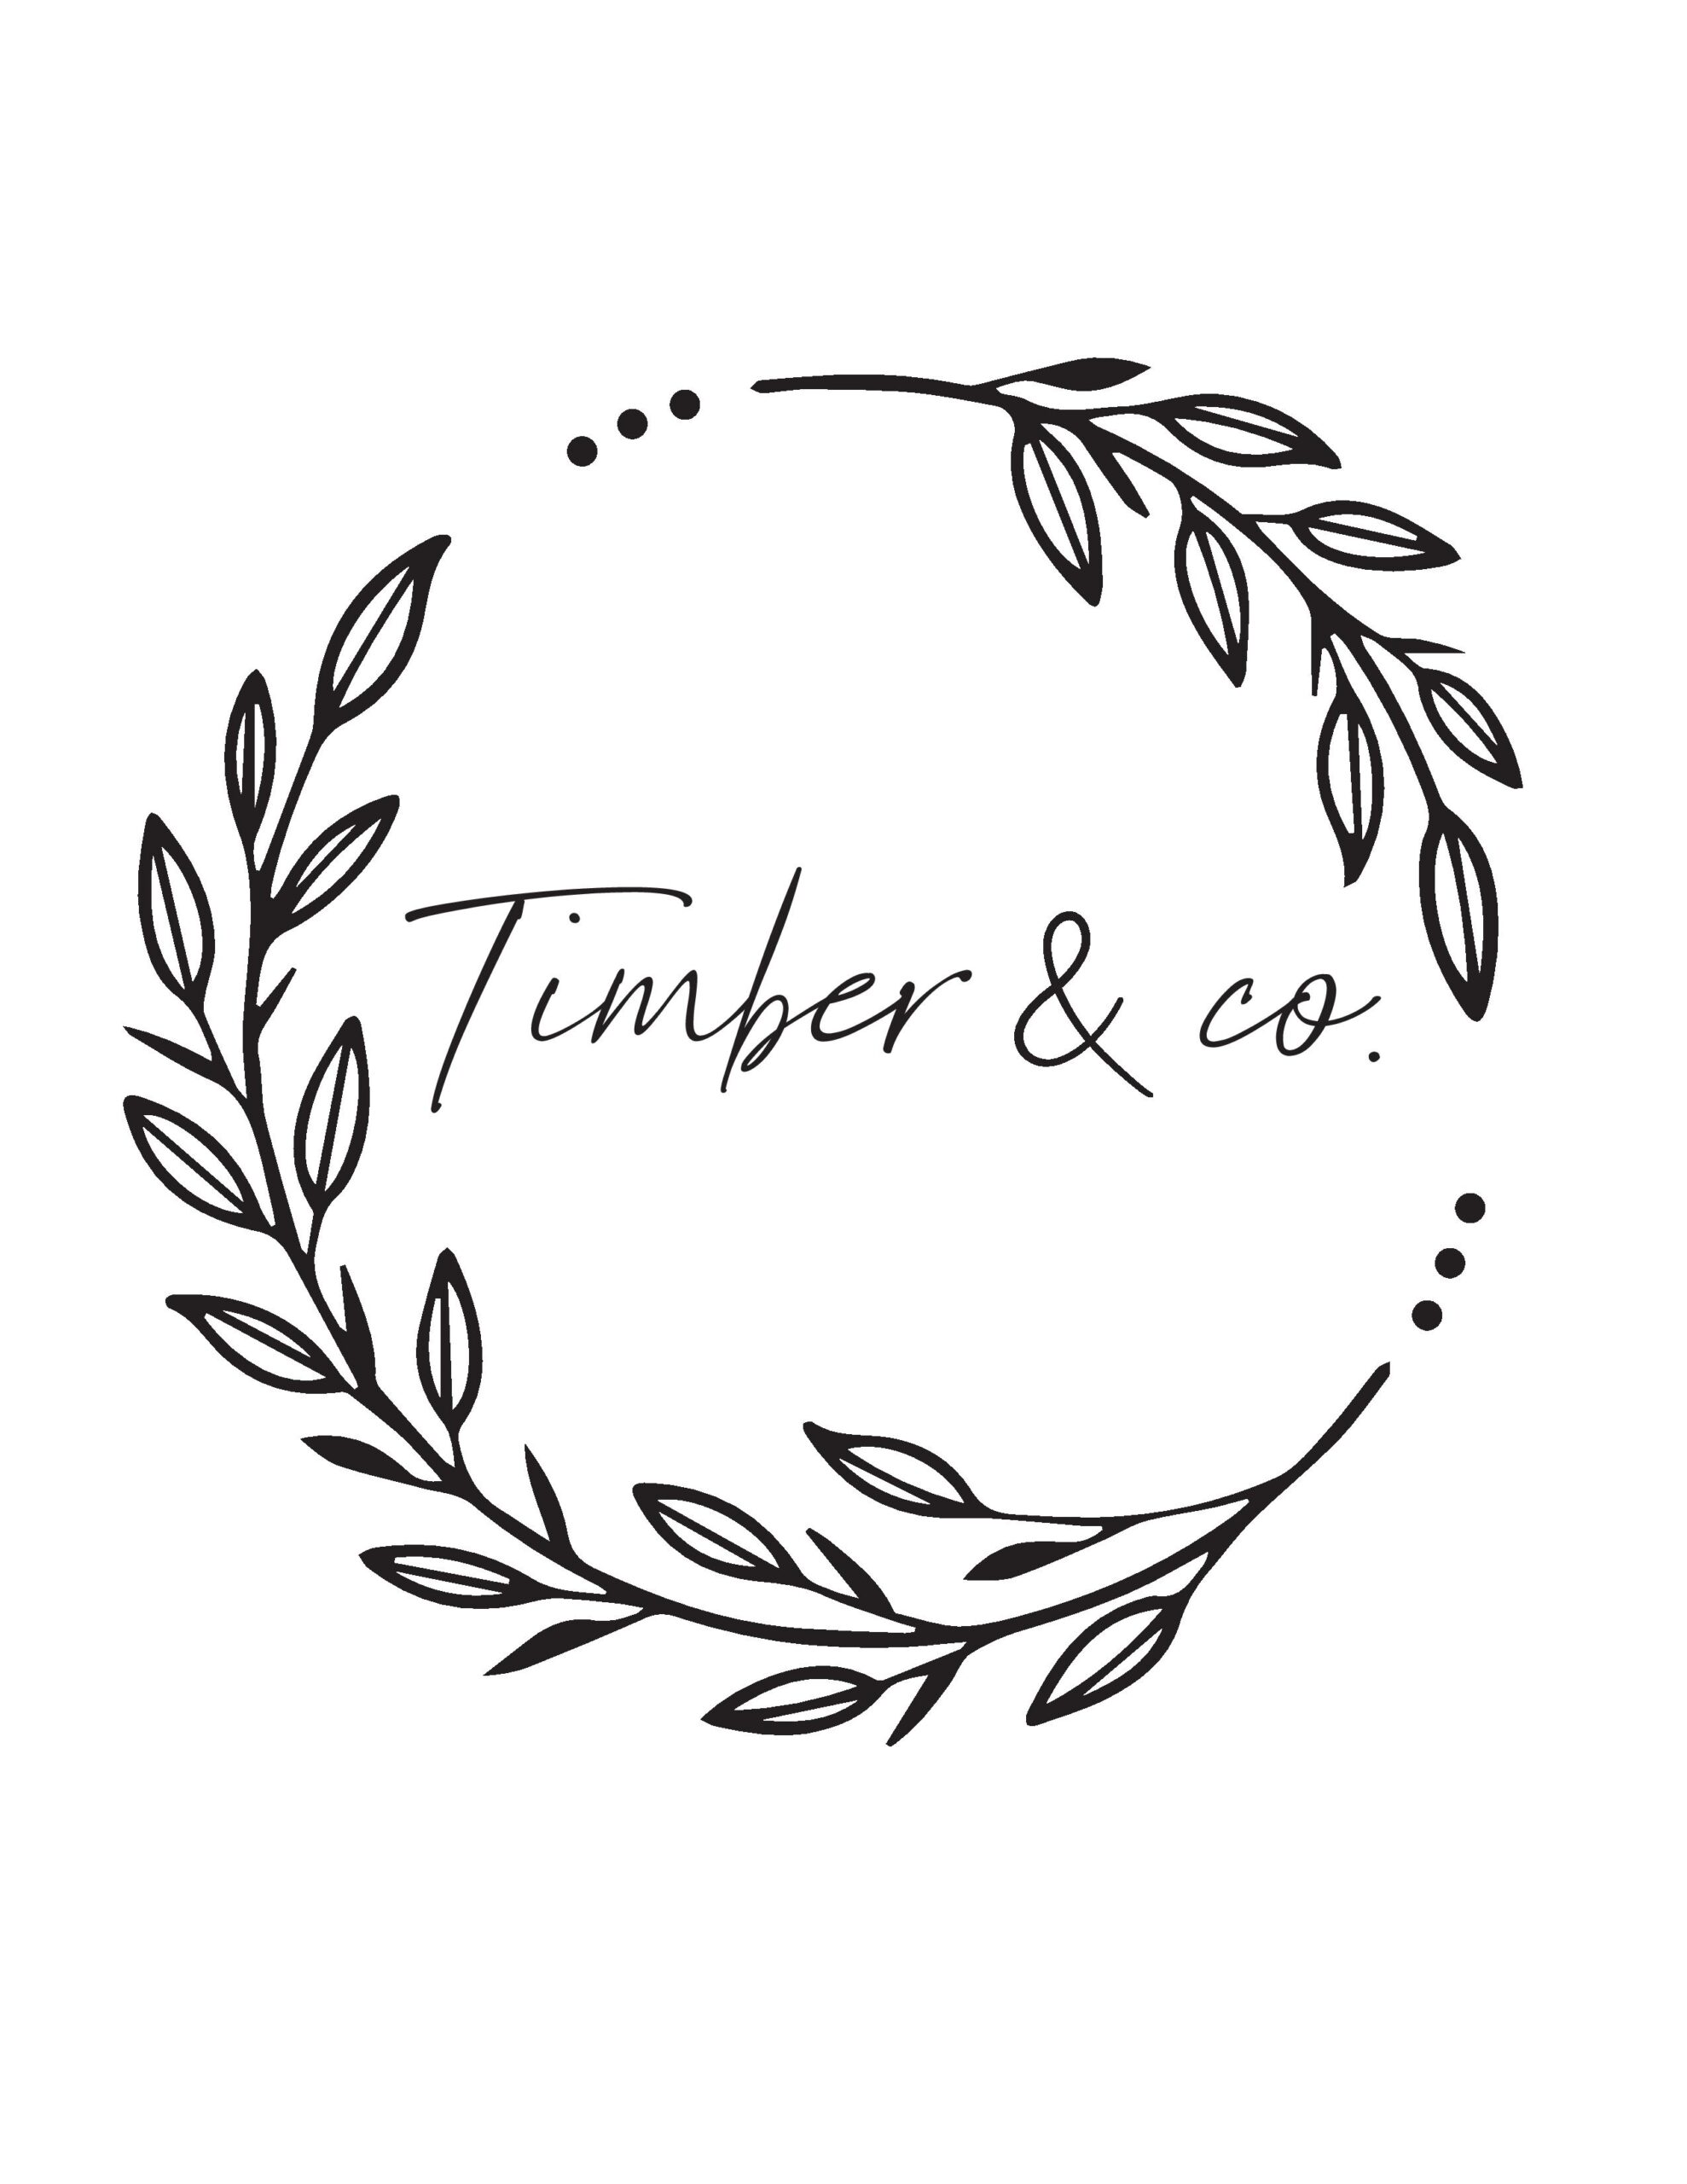 Timber & Co